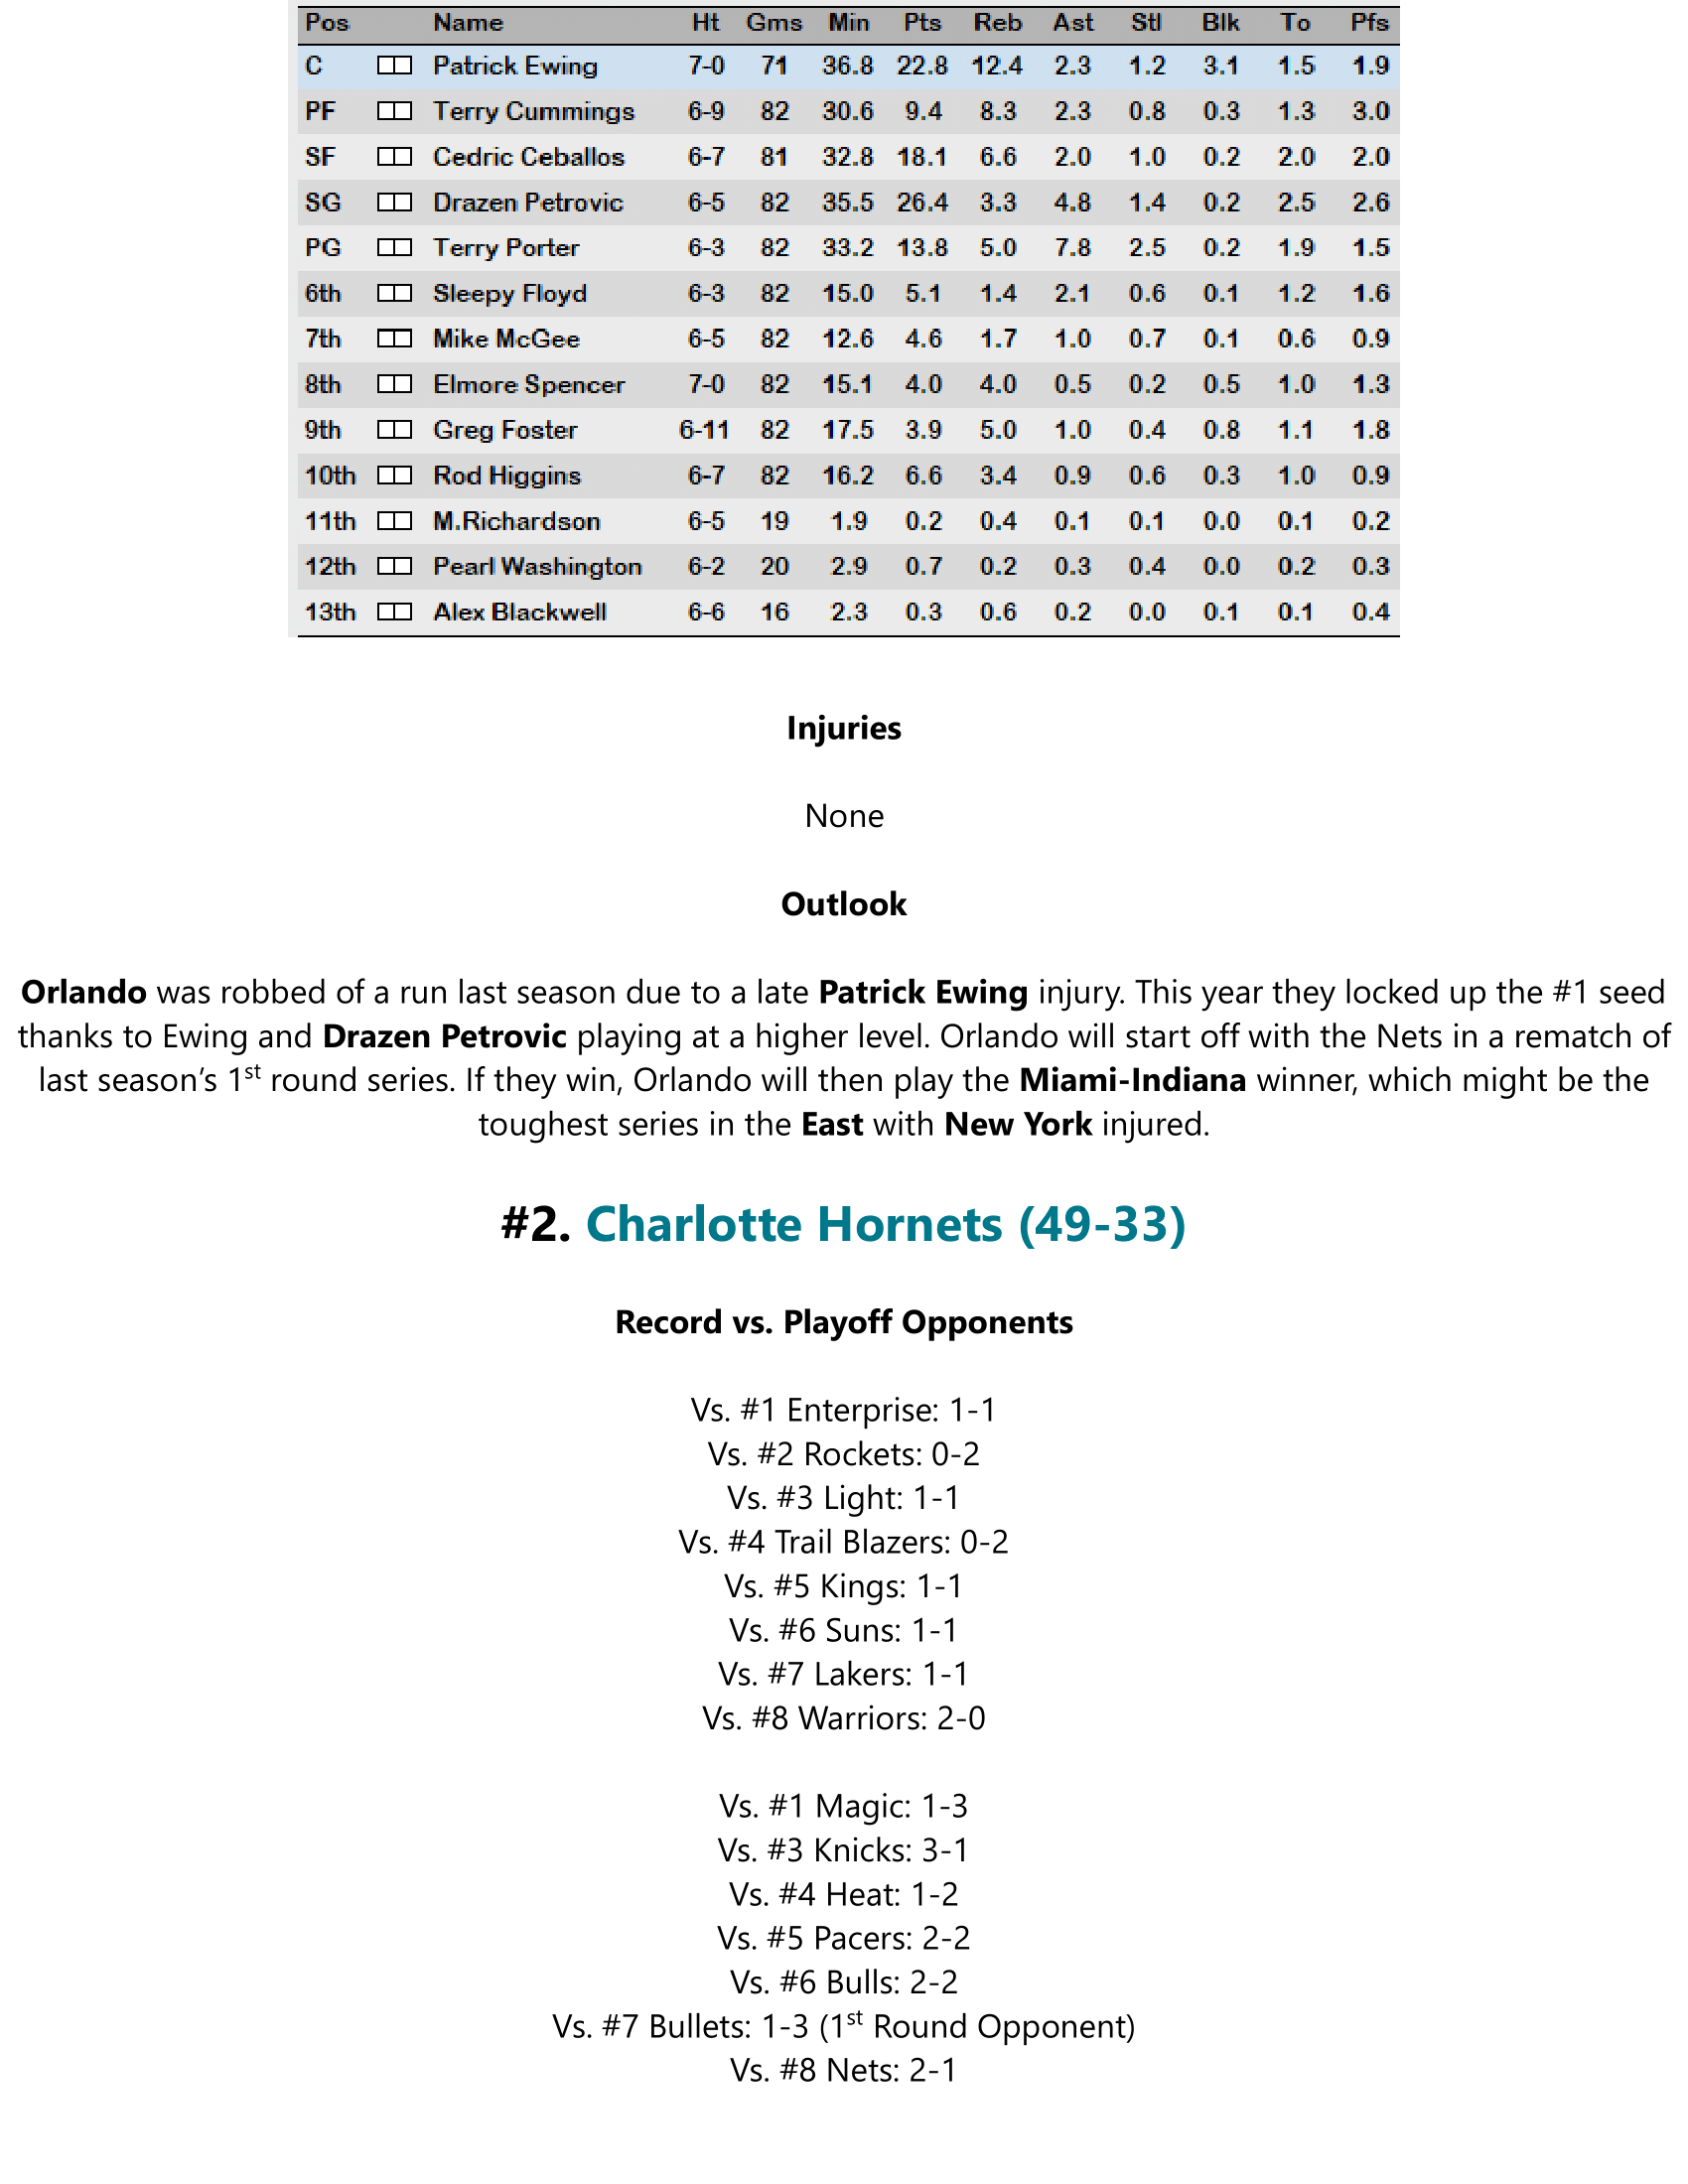 93-94-Part-4-Playoff-Preview-15.png